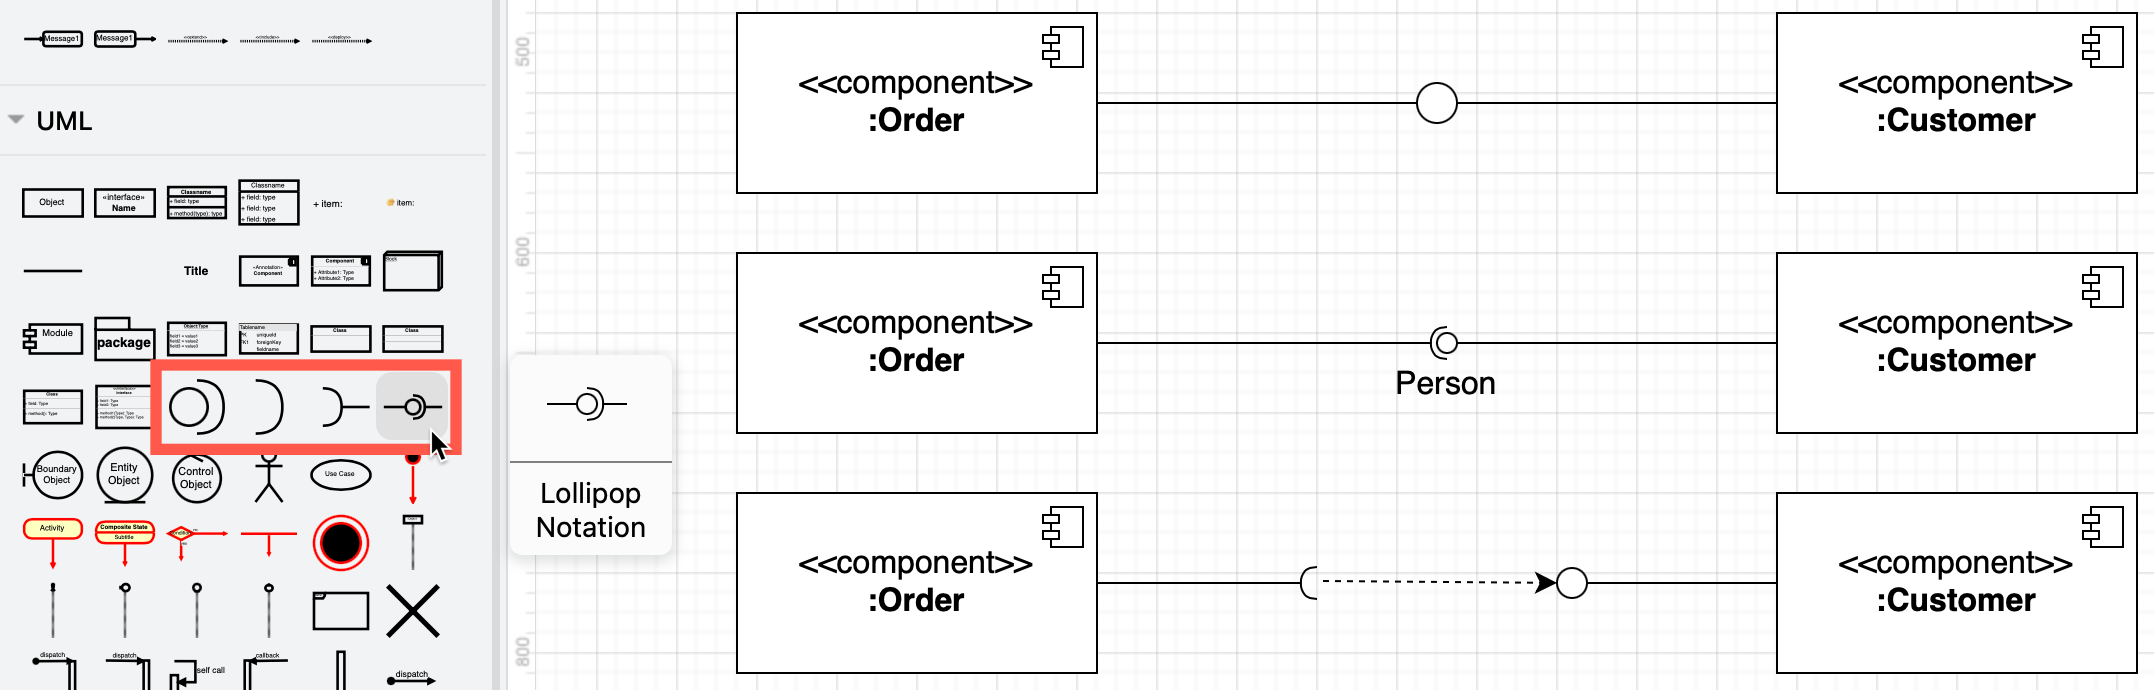 There are many interface shapes in the UML shape libraries in draw.io - pick your favourite combination for your component diagrams